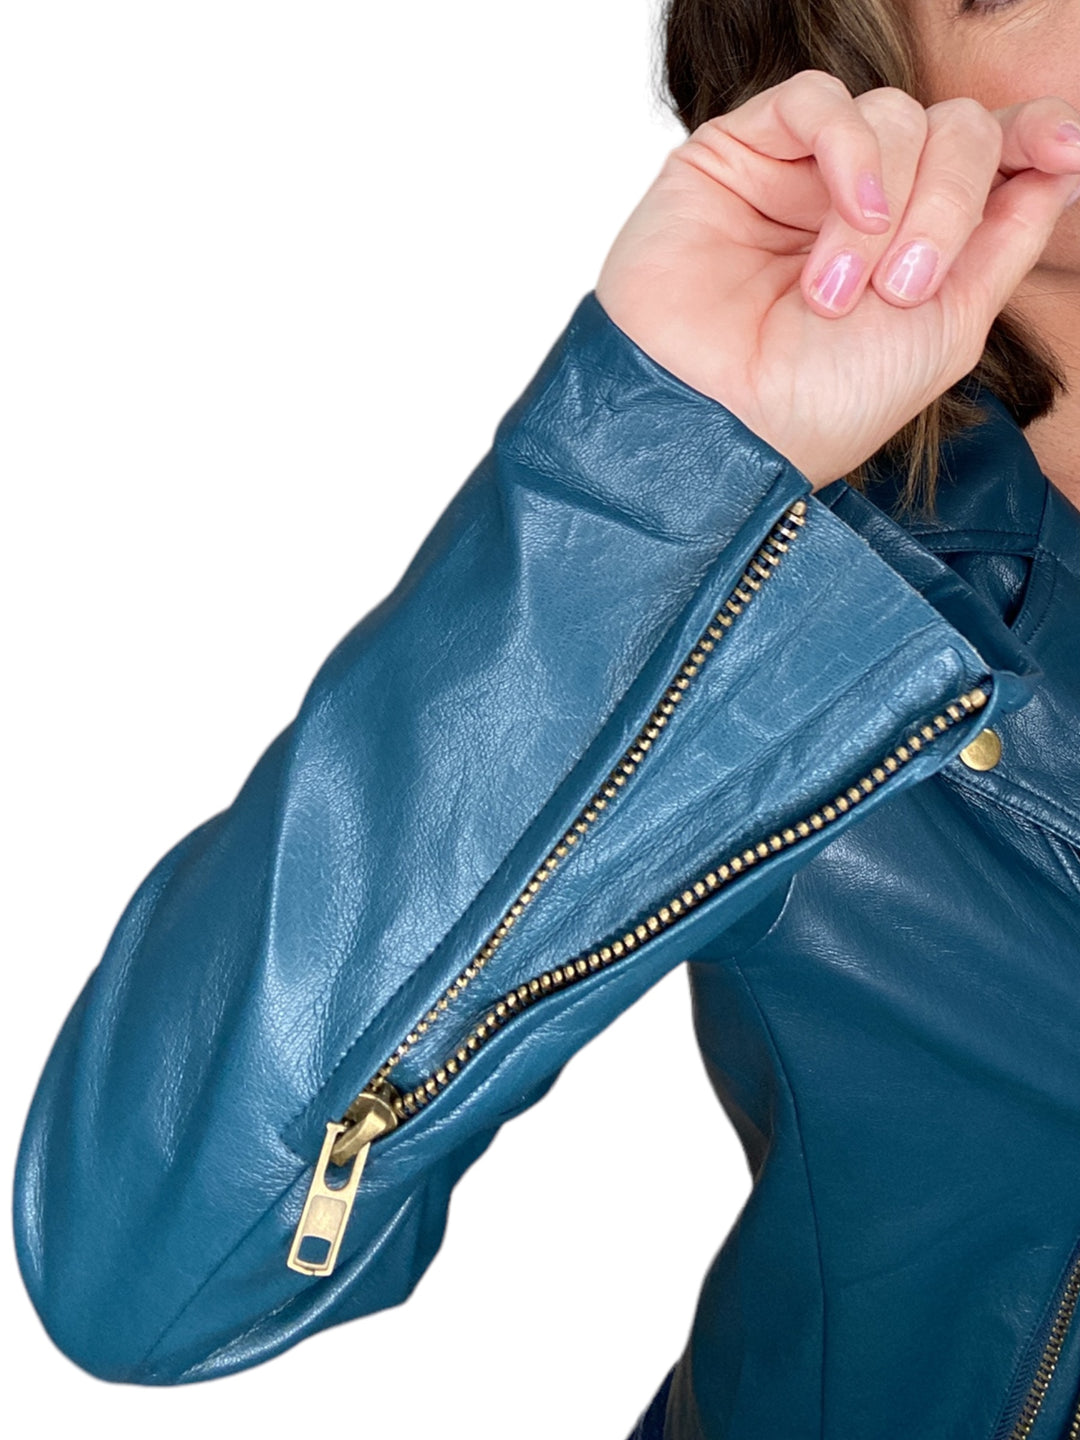 JUNO FAUX LEATHER JACKET-DARK TEAL - Kingfisher Road - Online Boutique